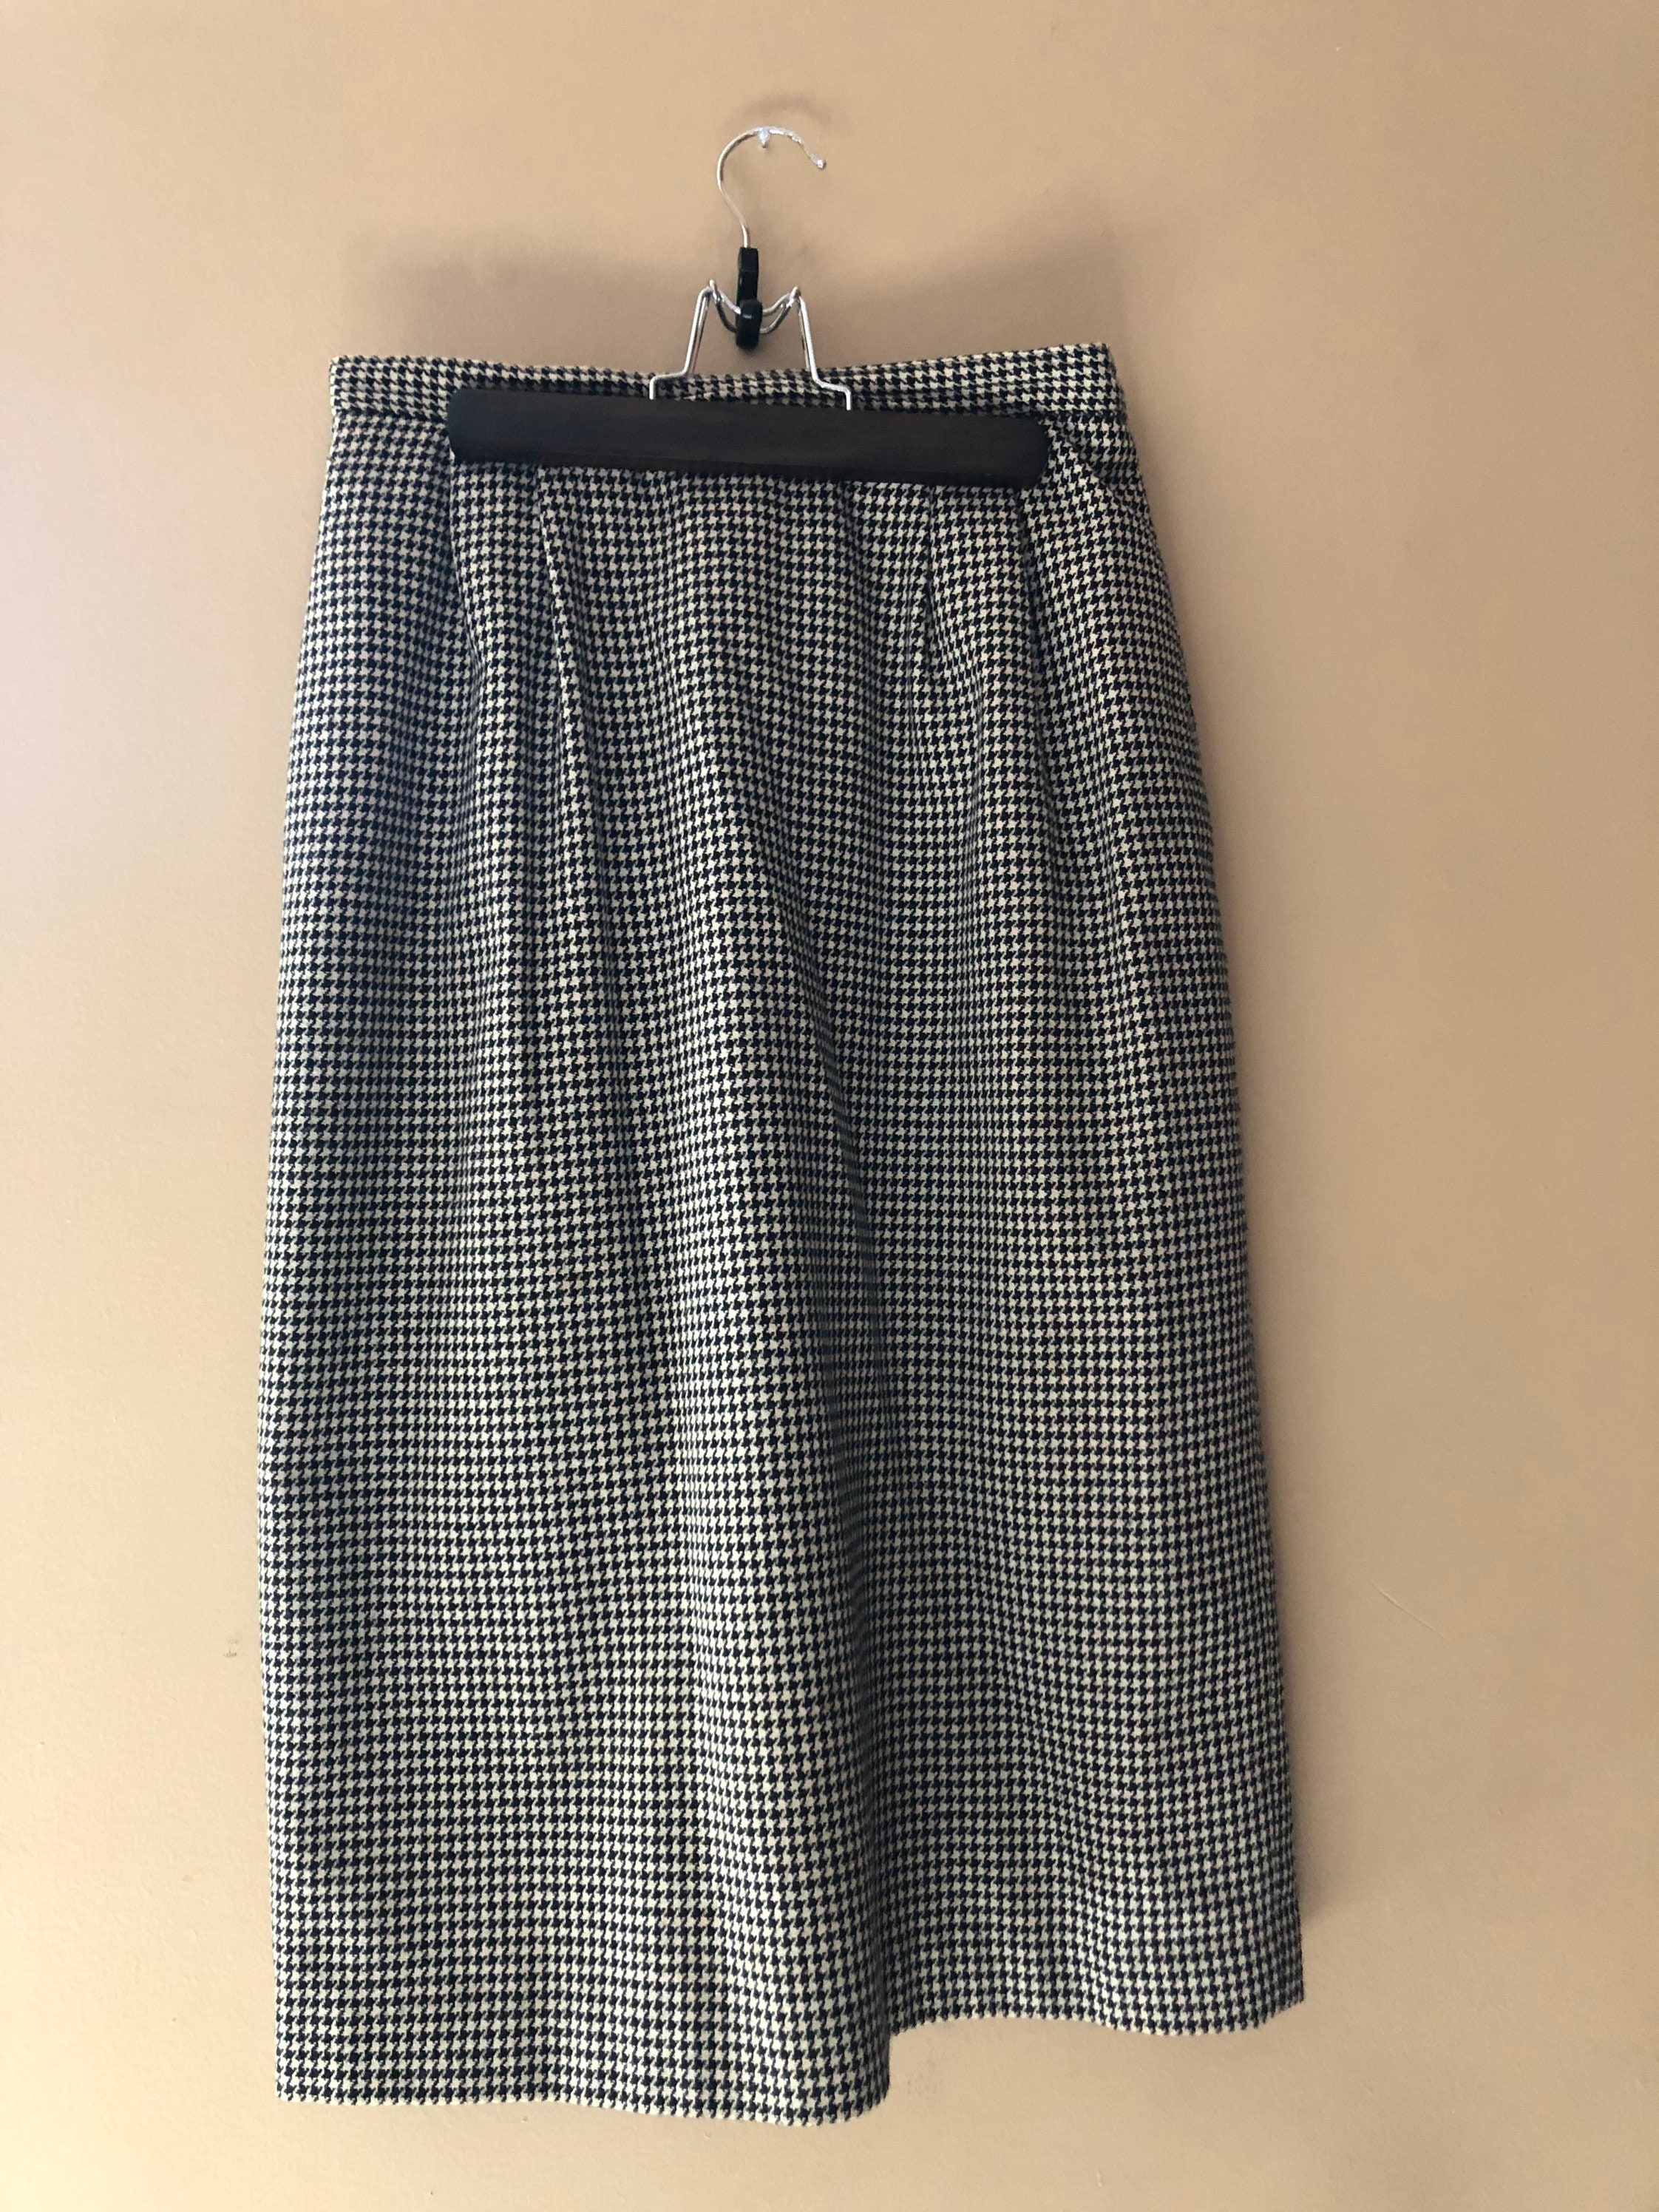 Vintage Houndstooth Plaid Suit and Skirt Set - Etsy